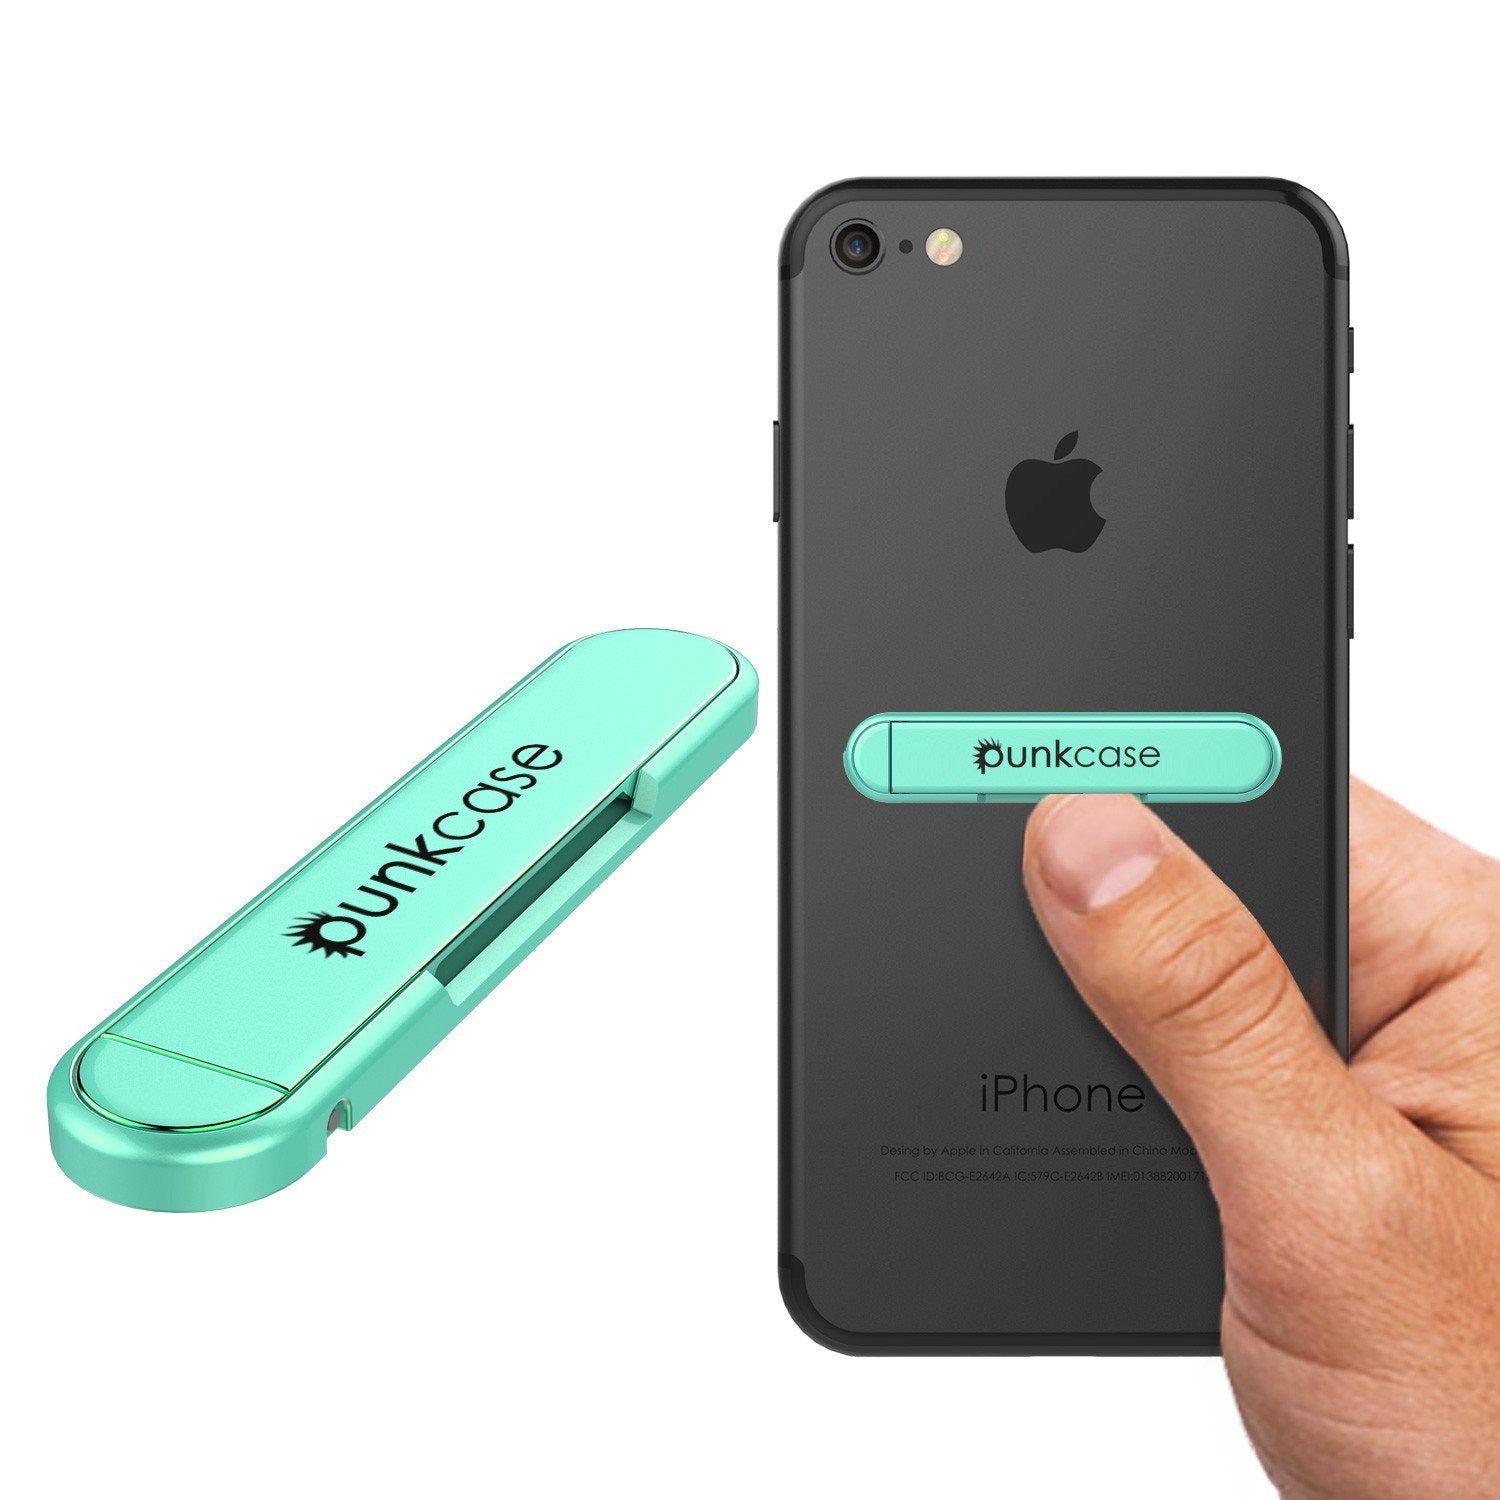 PUNKCASE FlickStick Universal Cell Phone Kickstand for all Mobile Phones & Cases with Flat Backs, One Finger Operation (Teal) (Color in image: Teal)